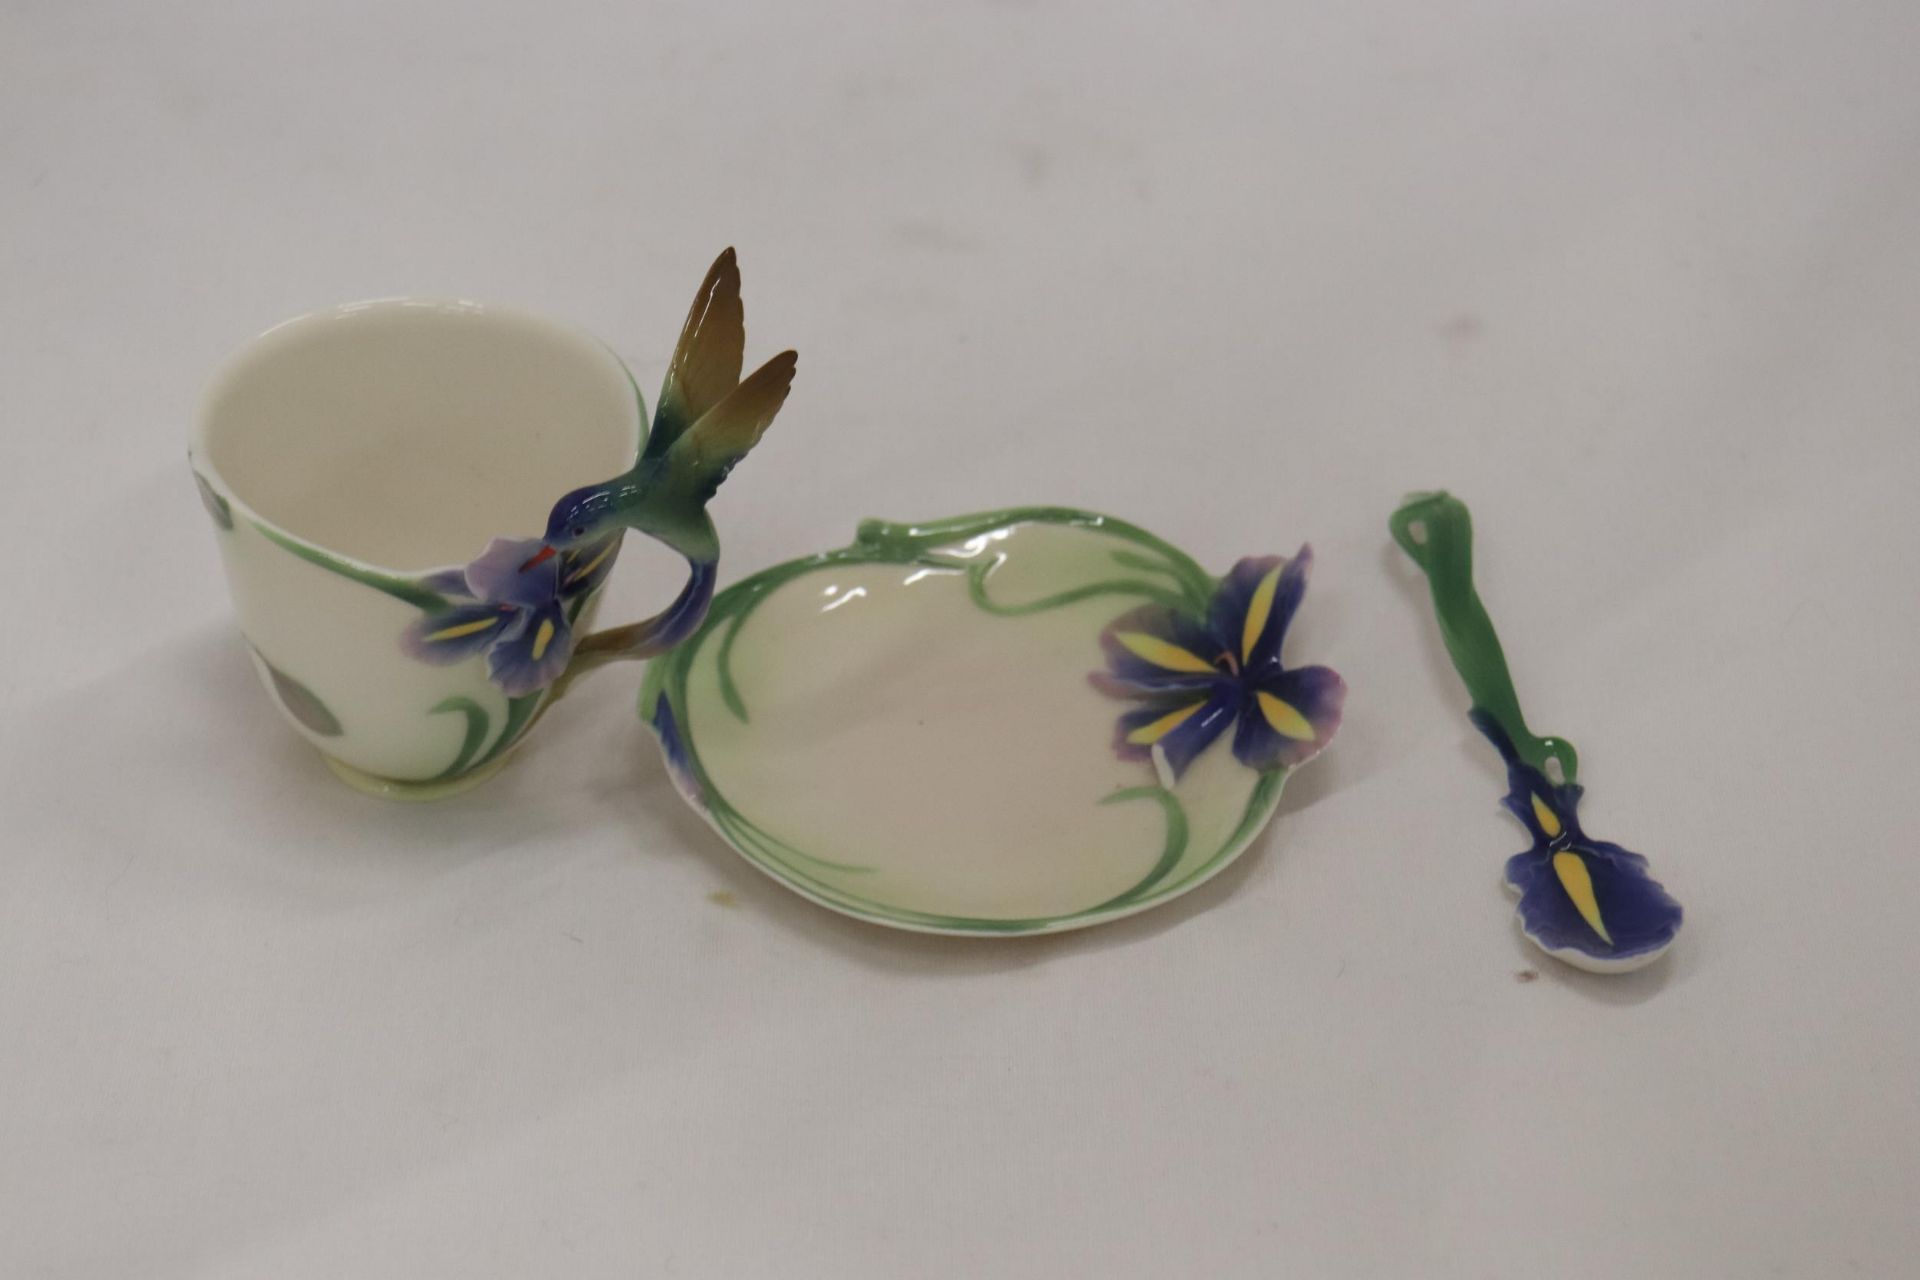 A FRANZ PORCELAIN CUP, SAUCER AND SPOON SET WITH HUMMING BIRD DESIGN. AF - CHIP TO SAUCER - Image 3 of 8